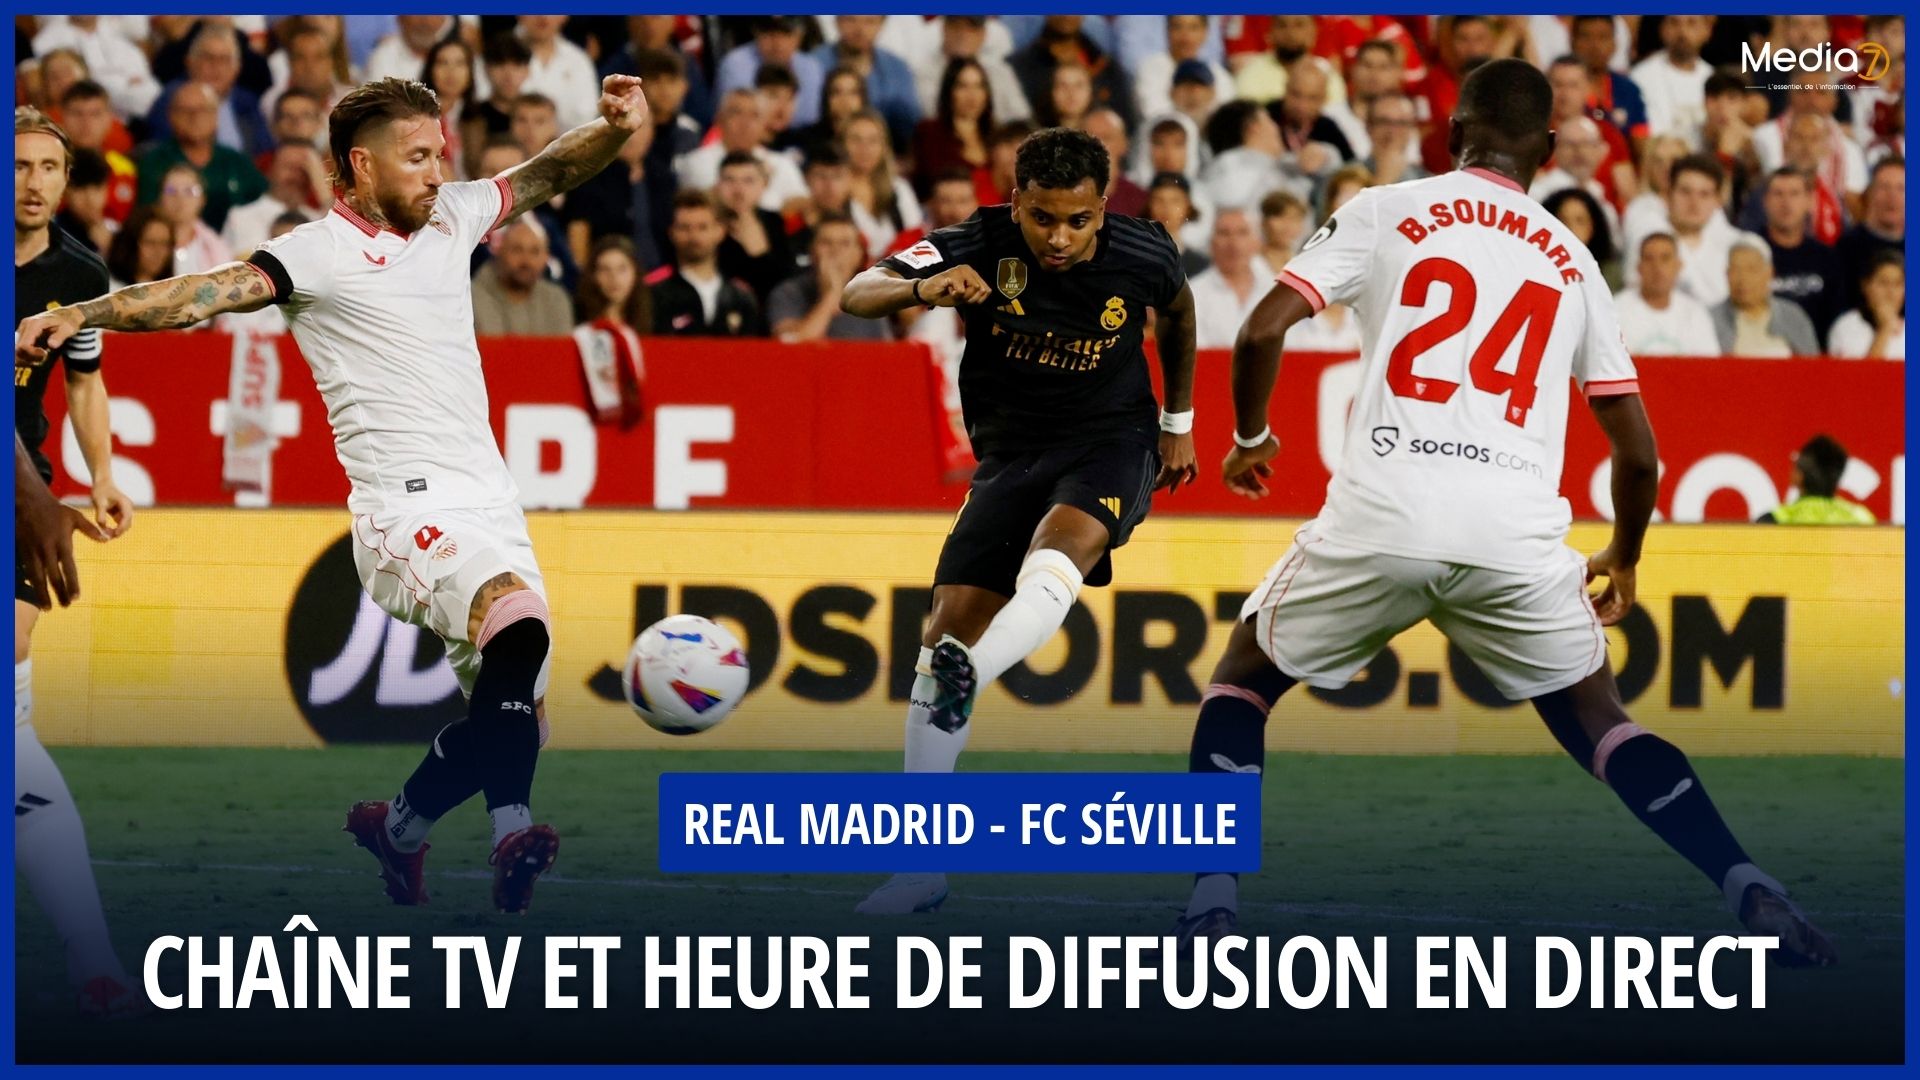 Real Madrid - Sevilla FC Match Live: TV Channel and Broadcast Time - Media7